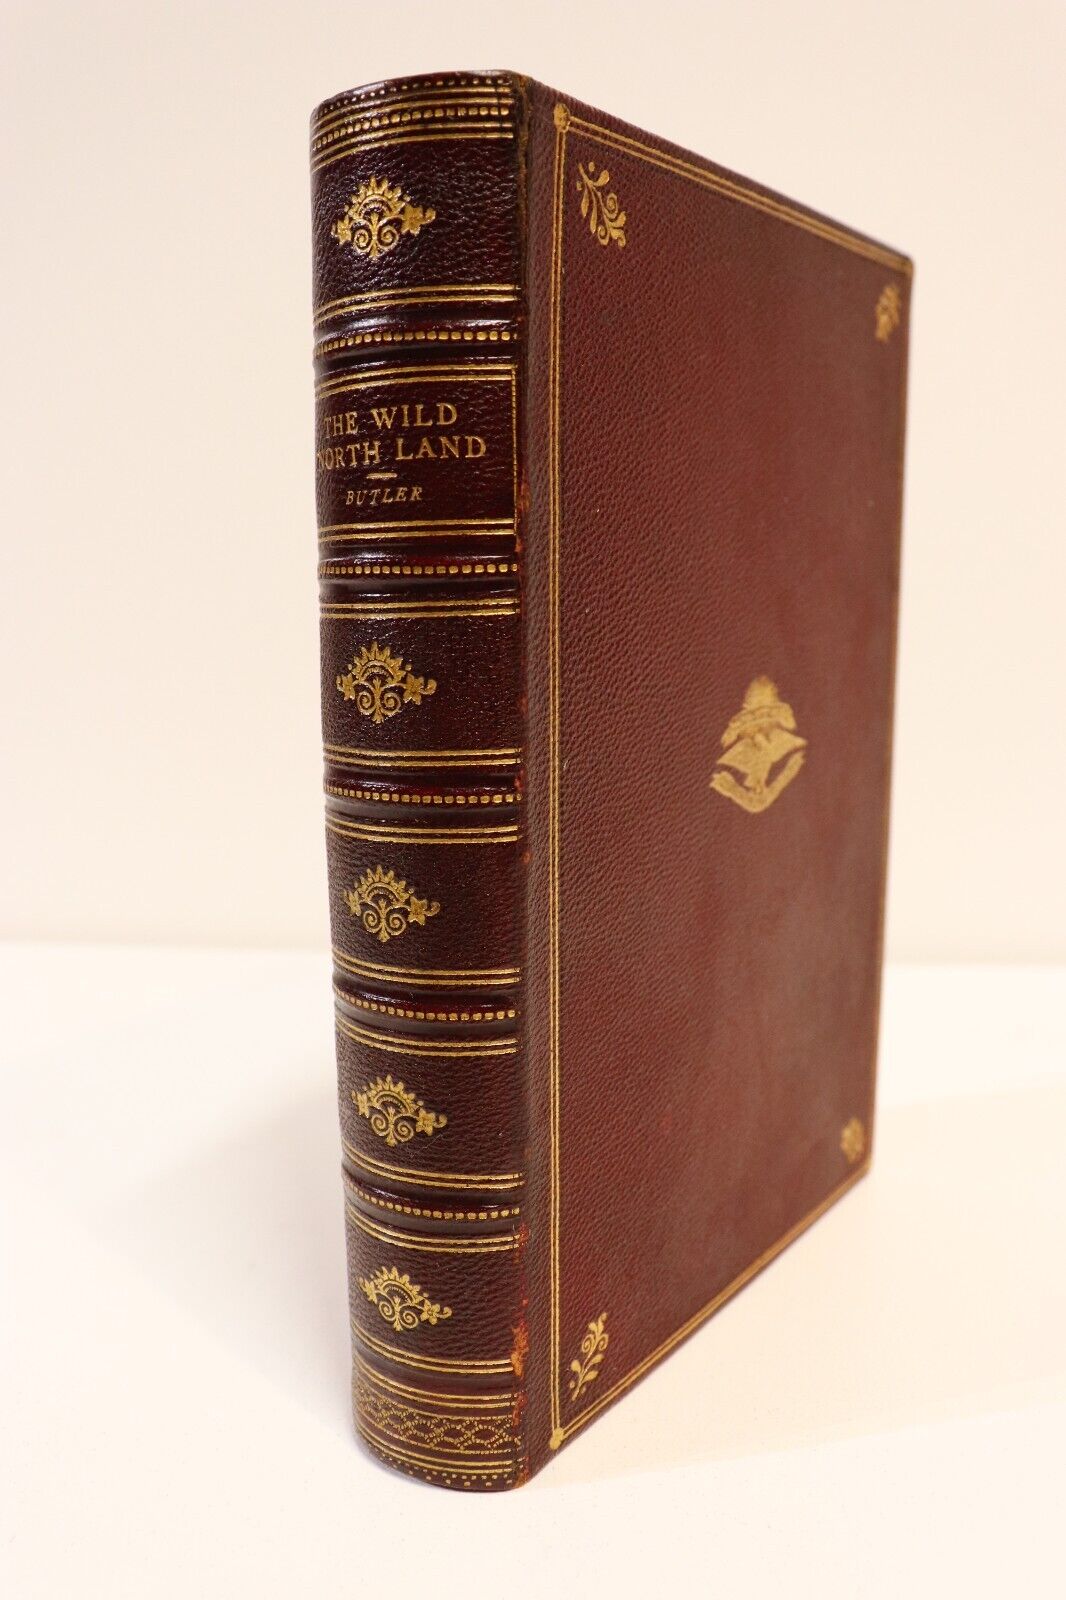 The Wild North Land by W.F. Butler - 1884 - Antique Exploration Adventure Book